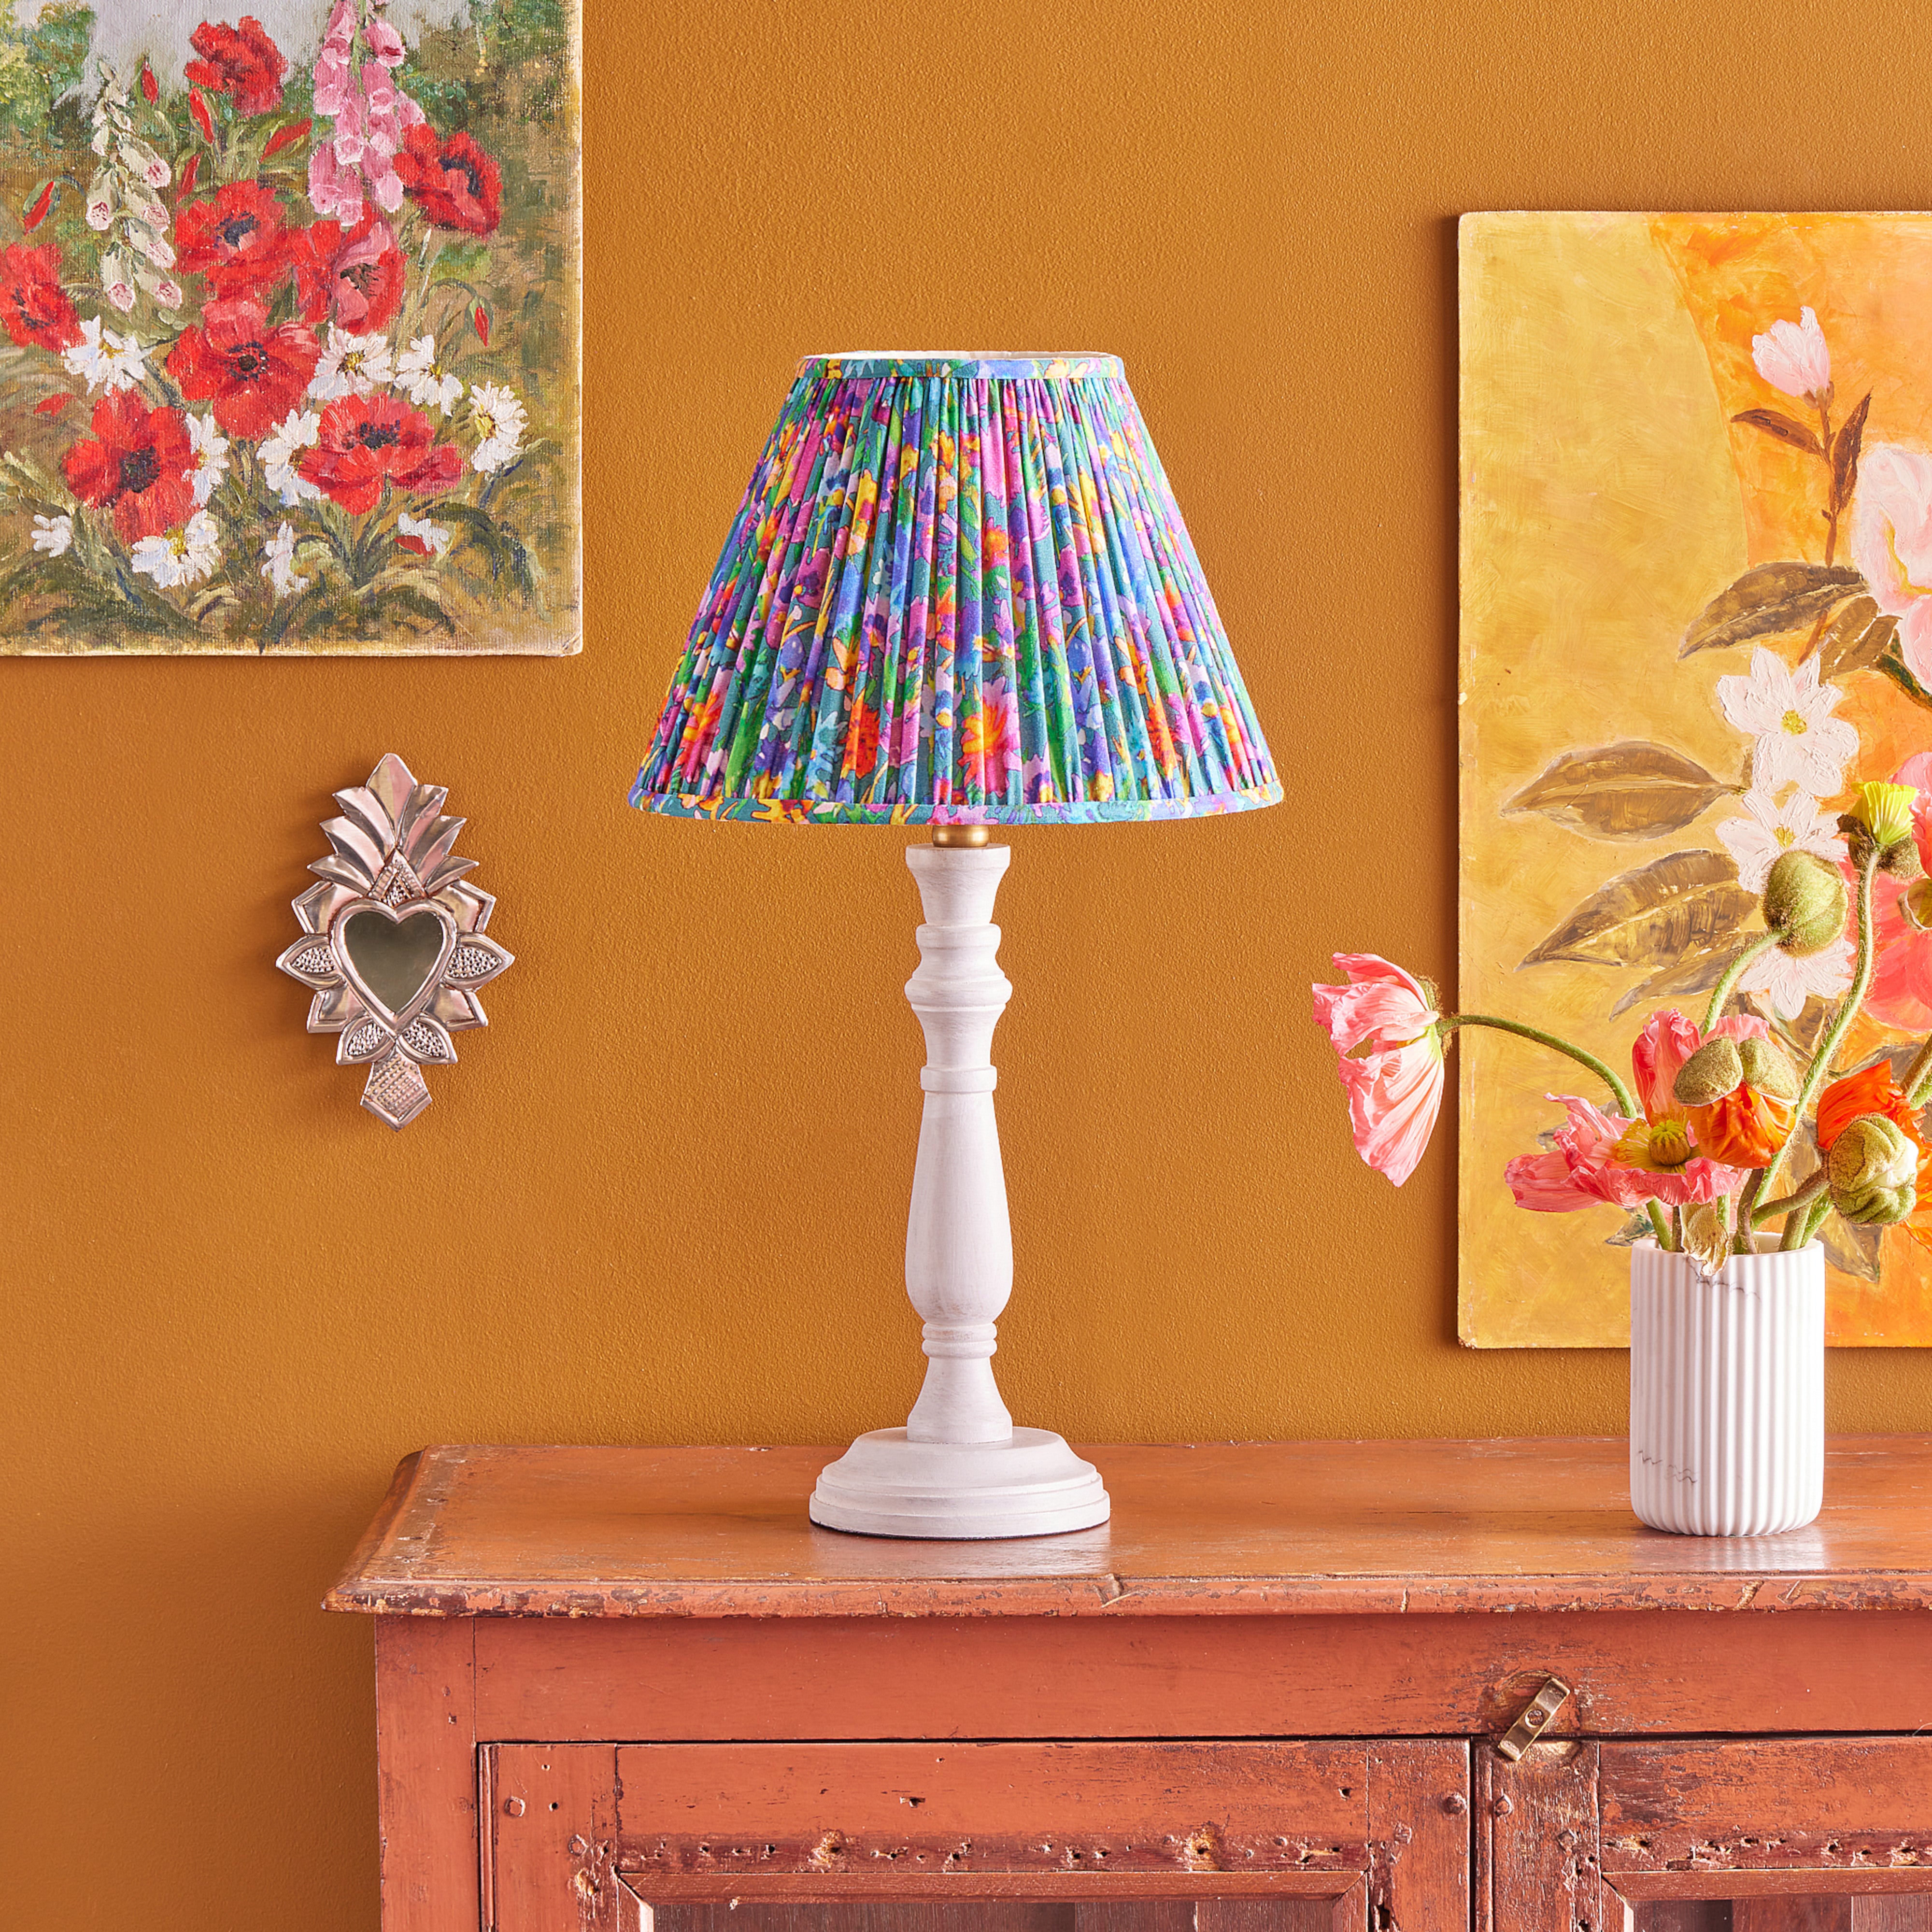 Lampshades are a quick and effective way to transform a space